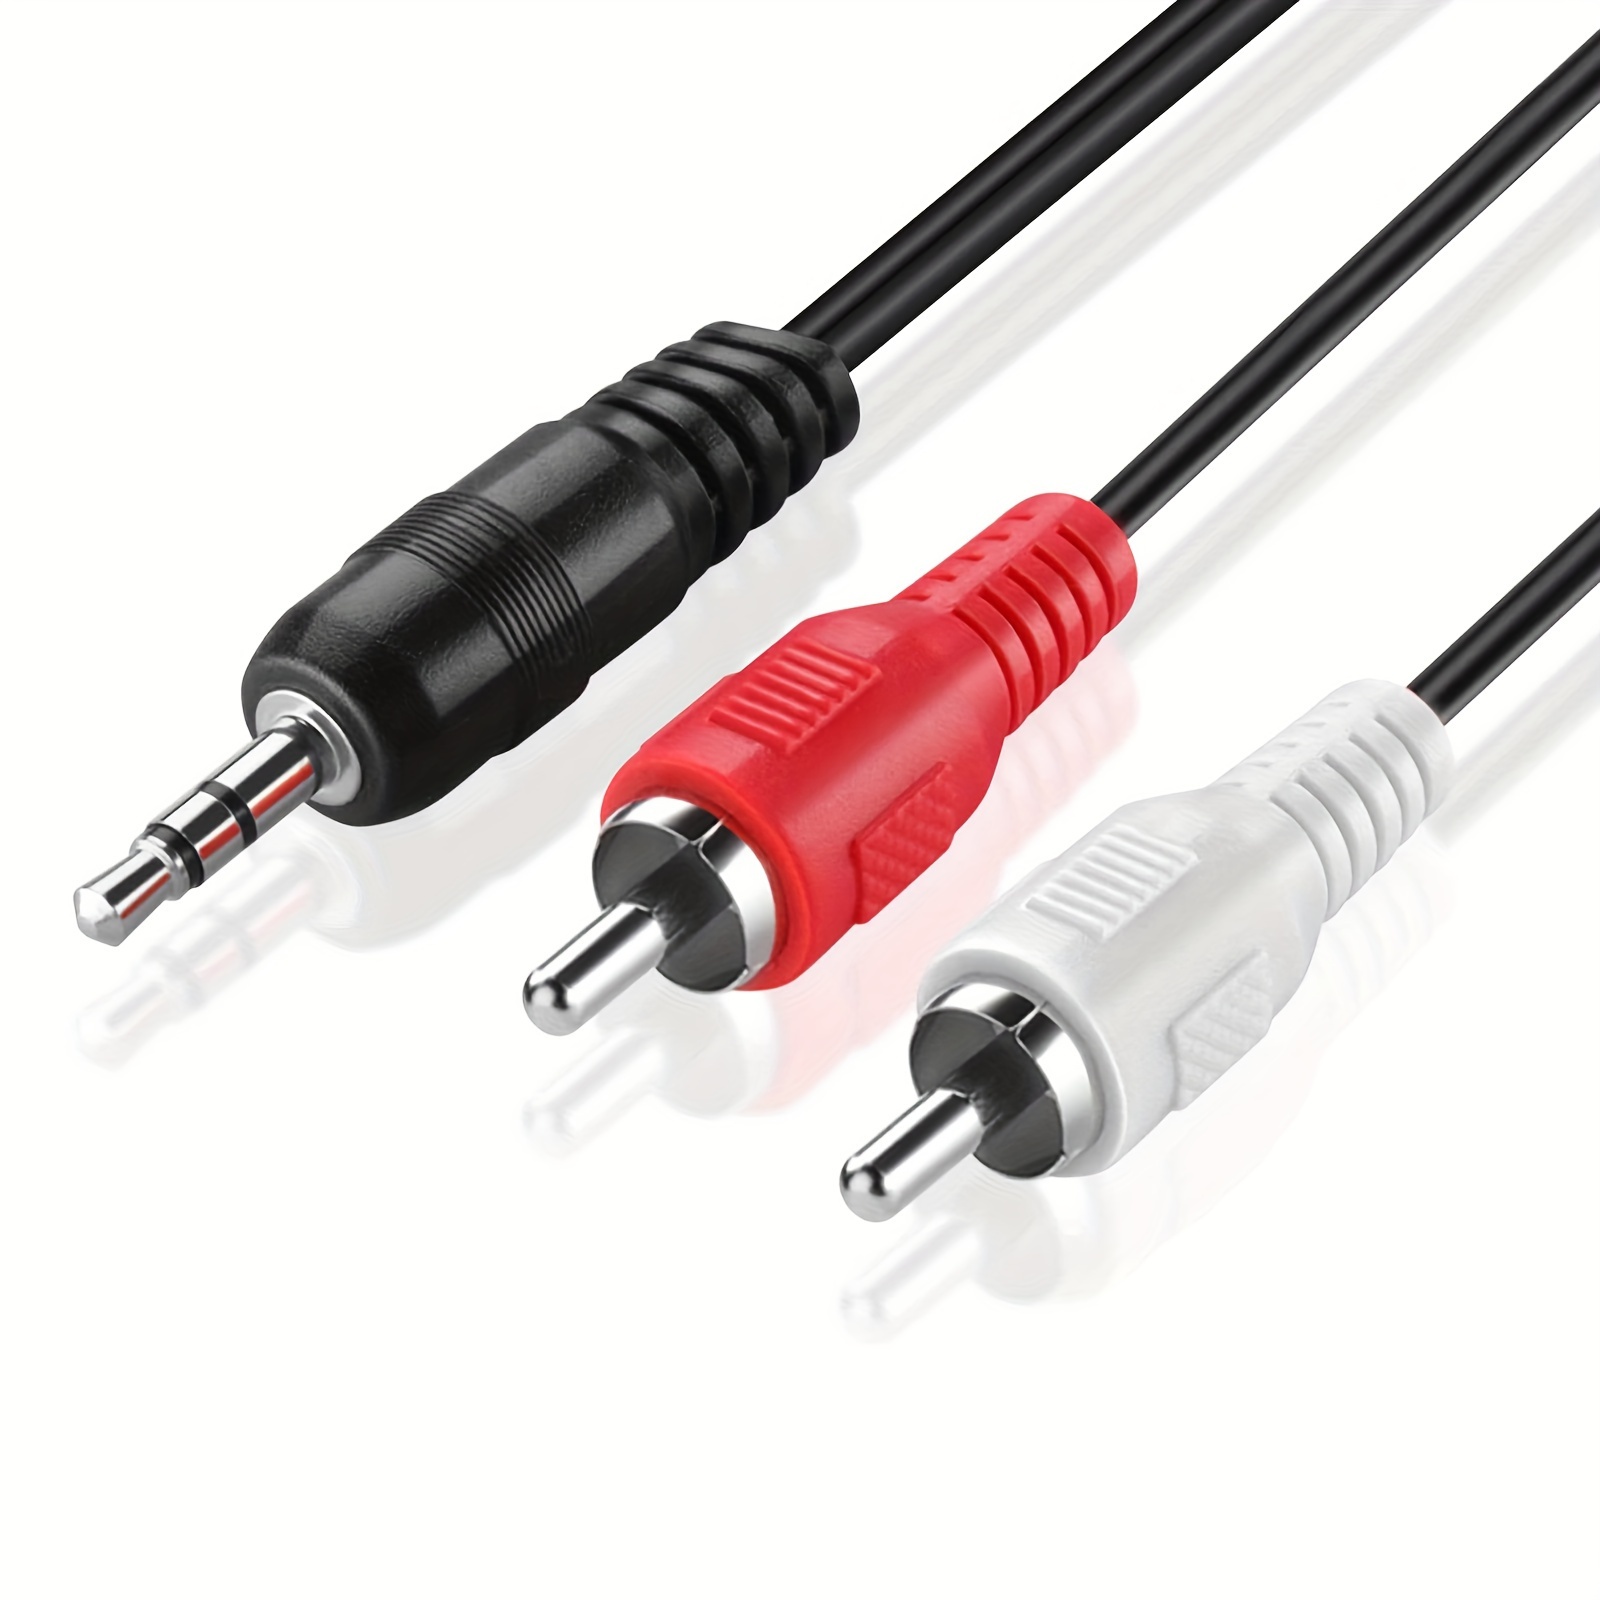 Buy 3.5mm Jack to Stereo RCA Cable, Audio accessories